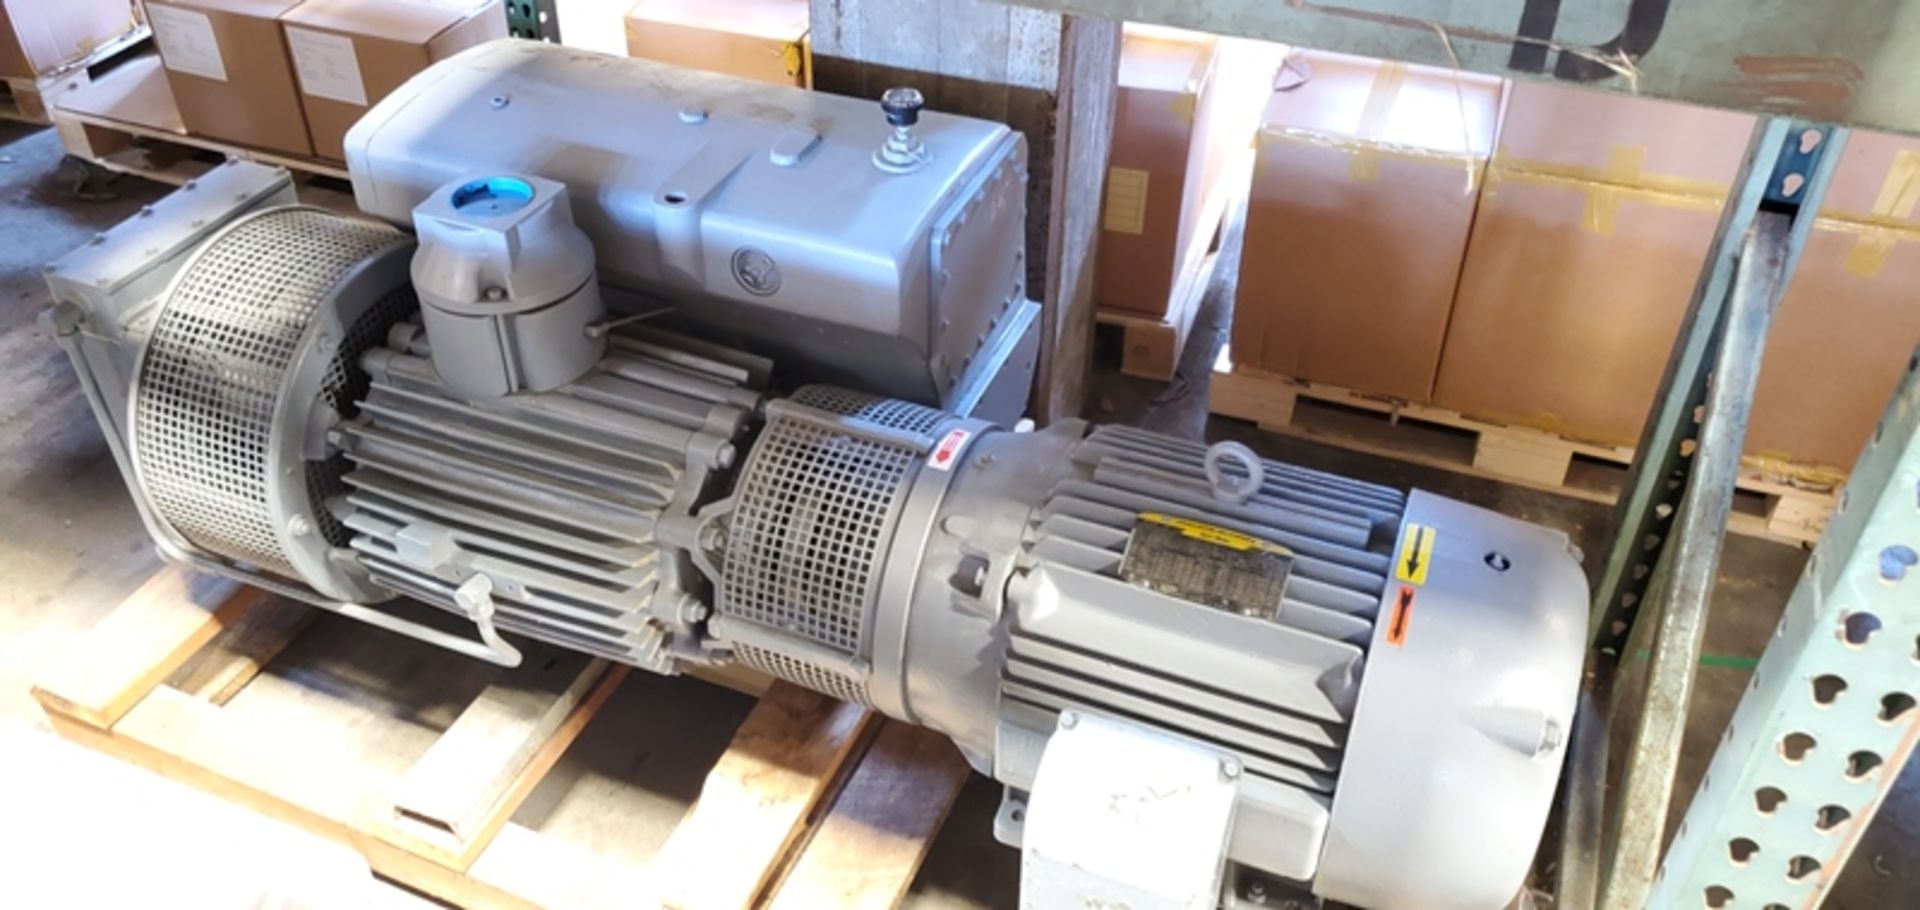 Busch Mdl. RA 0630 Vacuum Pump, 25hp, recently rebuilt, great condition, can be wired to run on